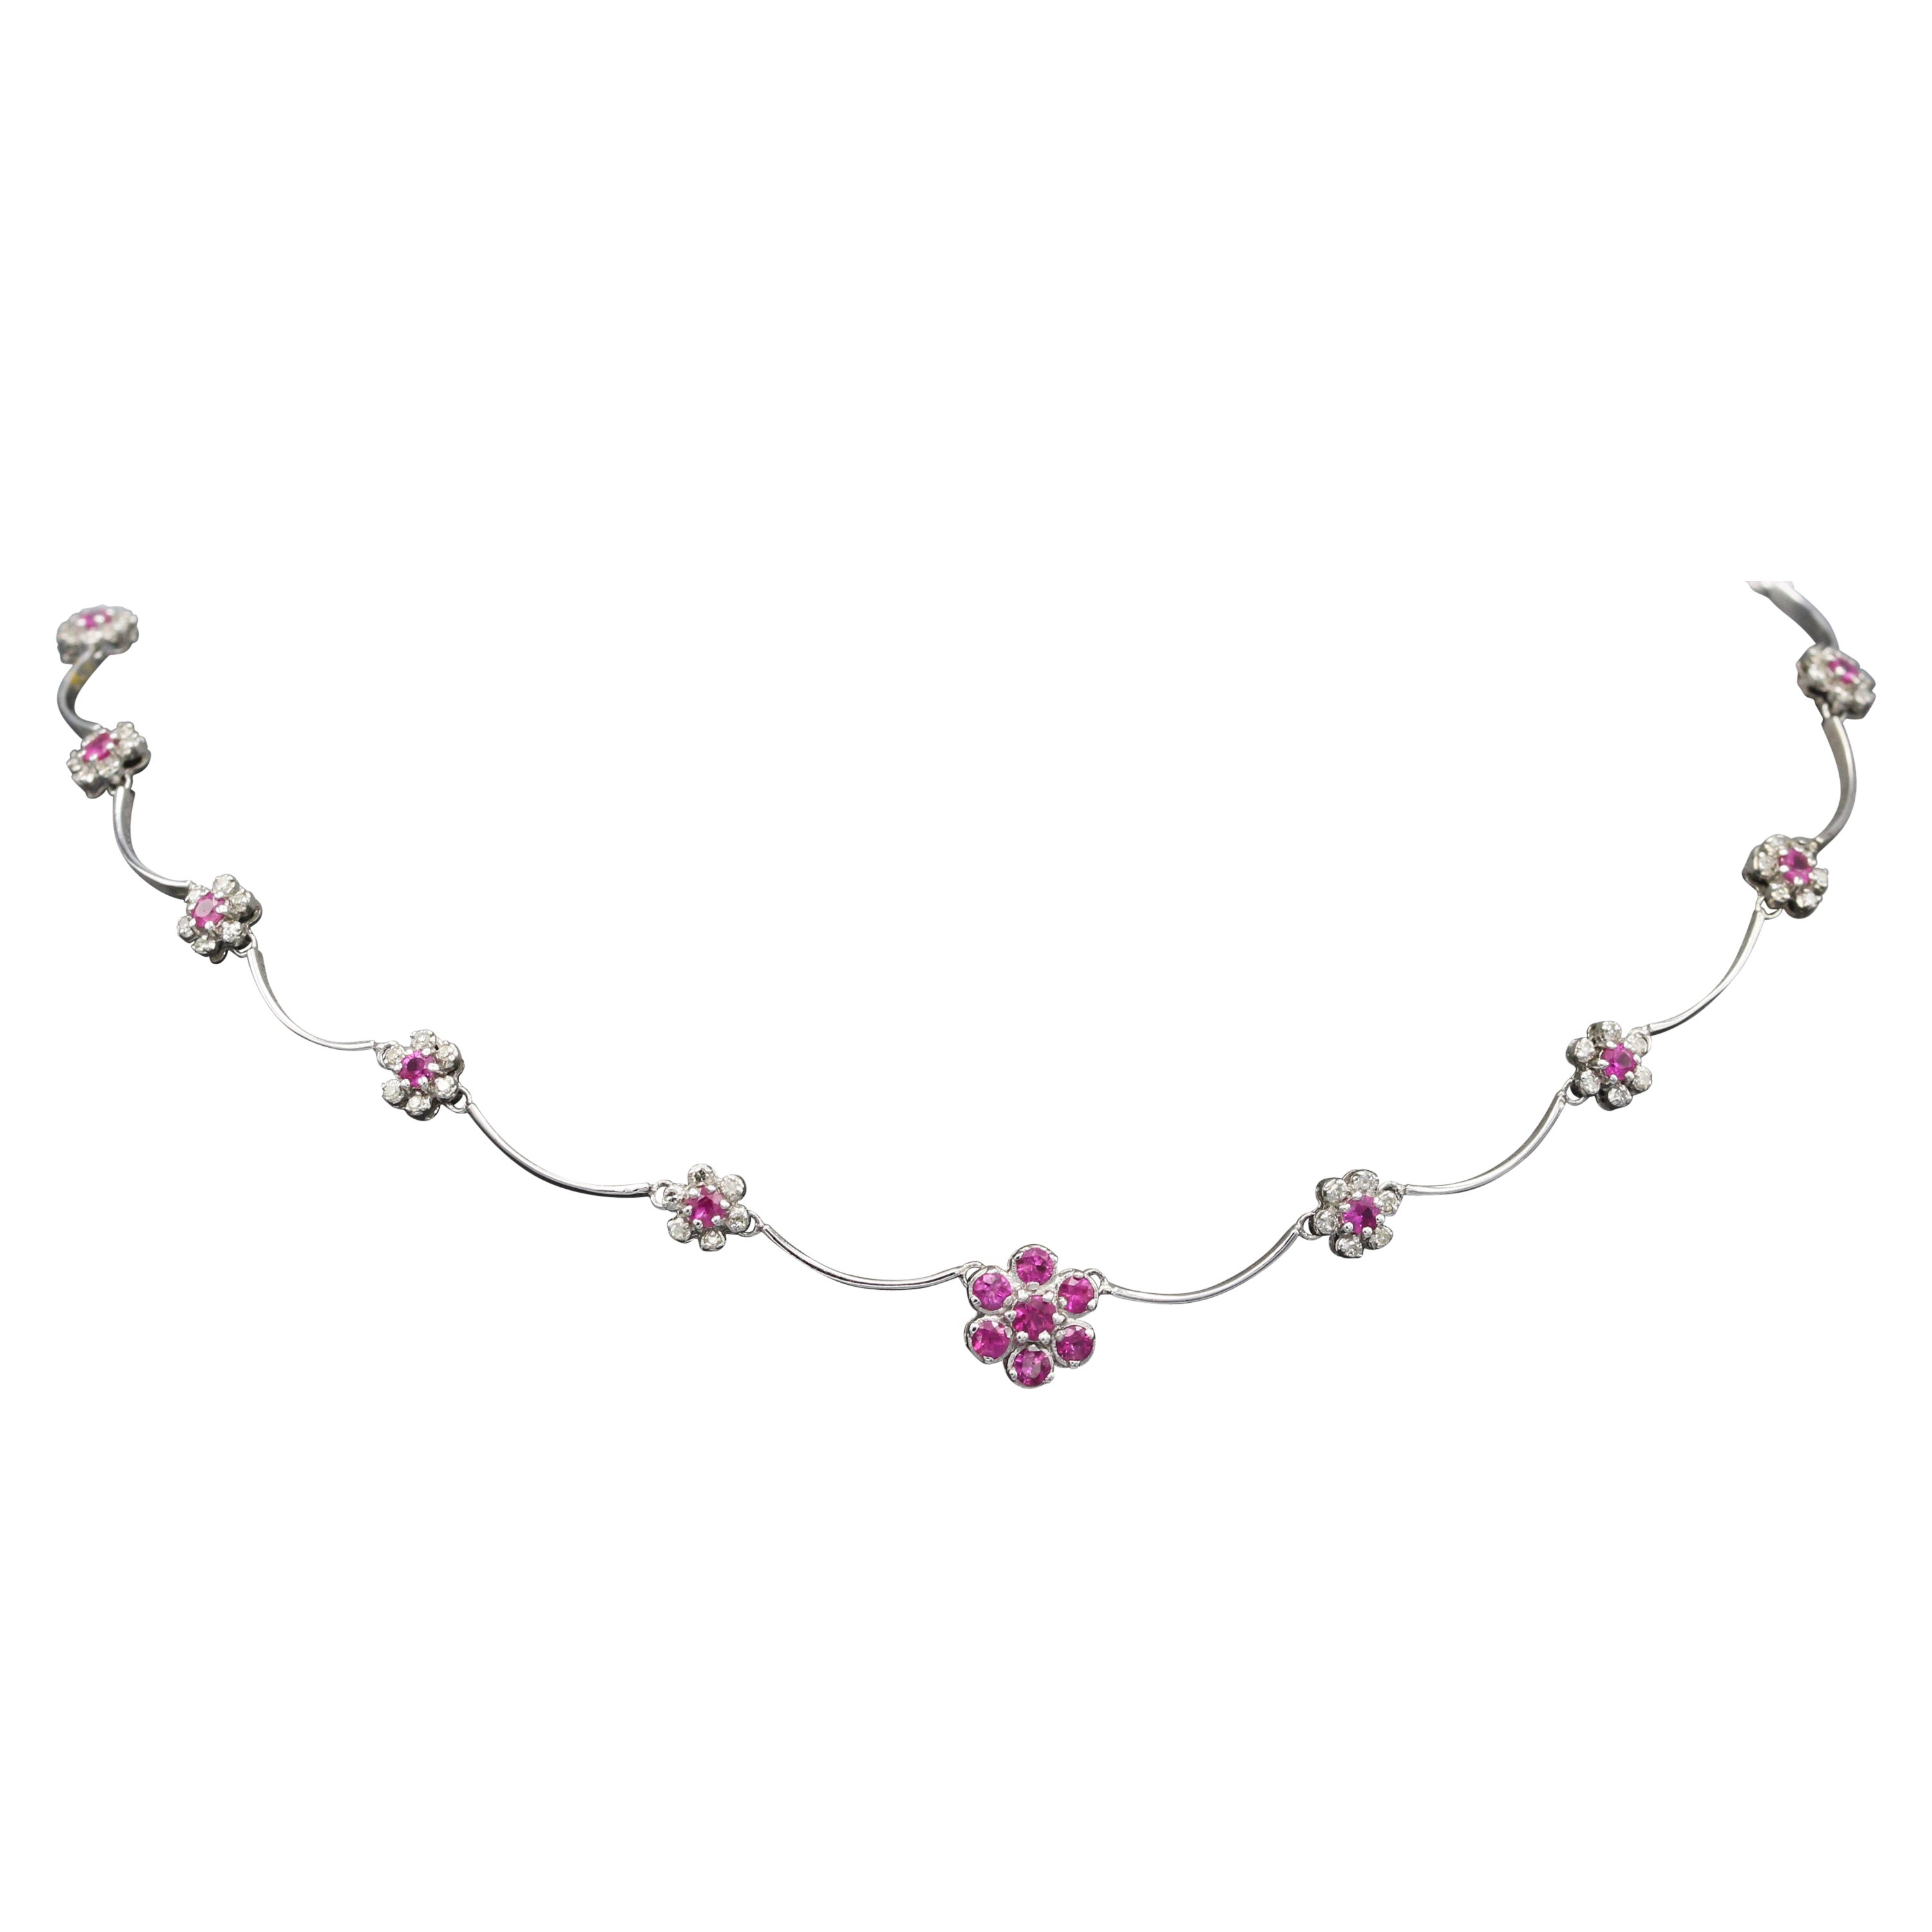 Natural Ruby Necklace Flower Style Necklace 14 Karat White Gold and Diamonds